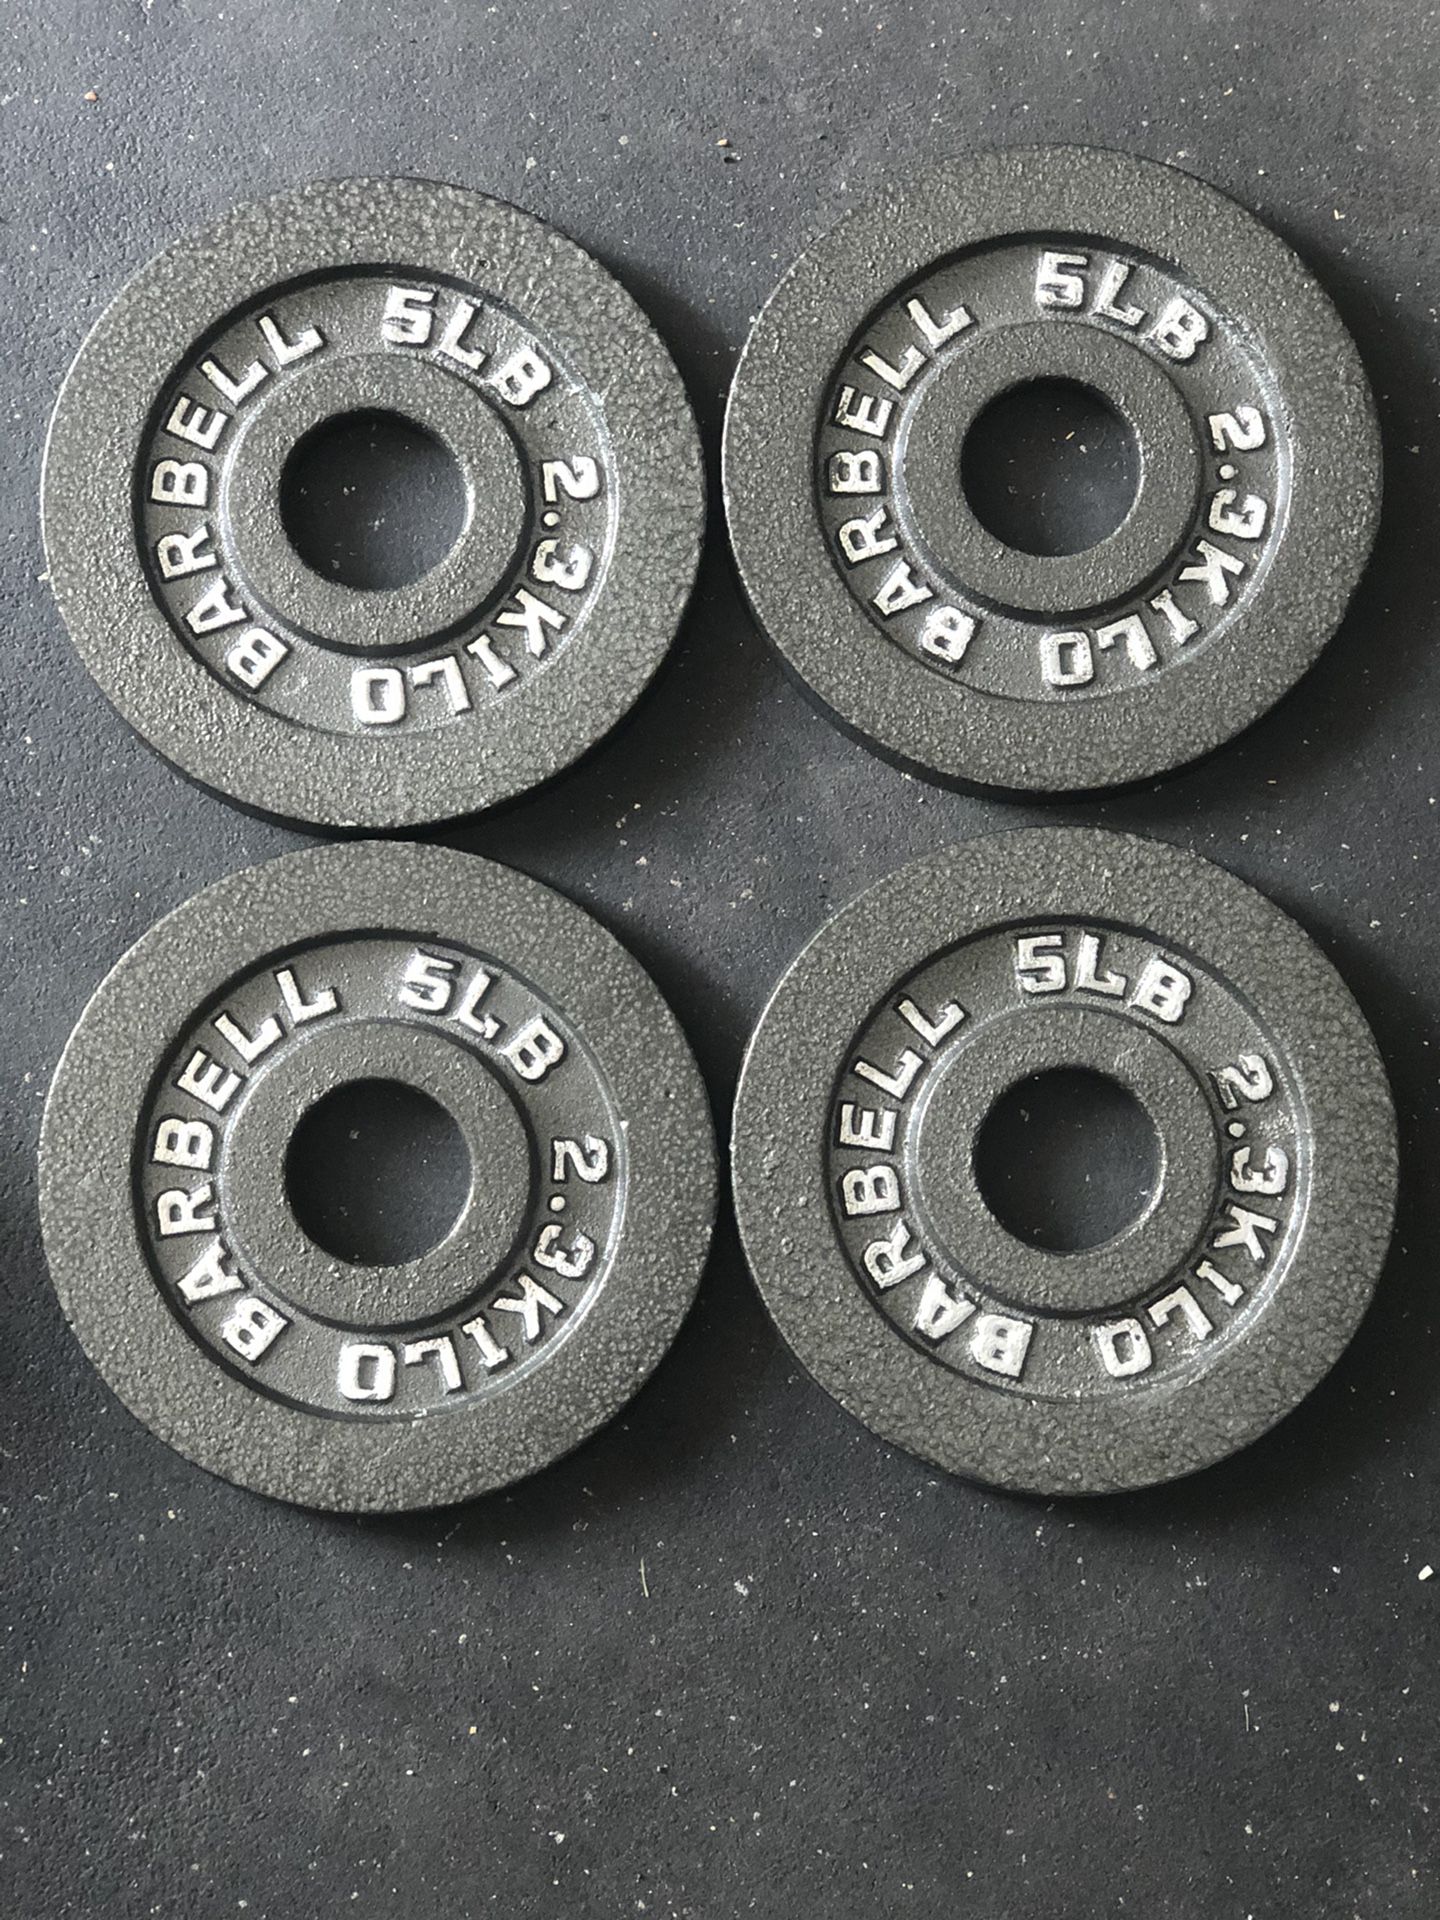 4 5lb Olympic Cast Iron Weight plates 2”